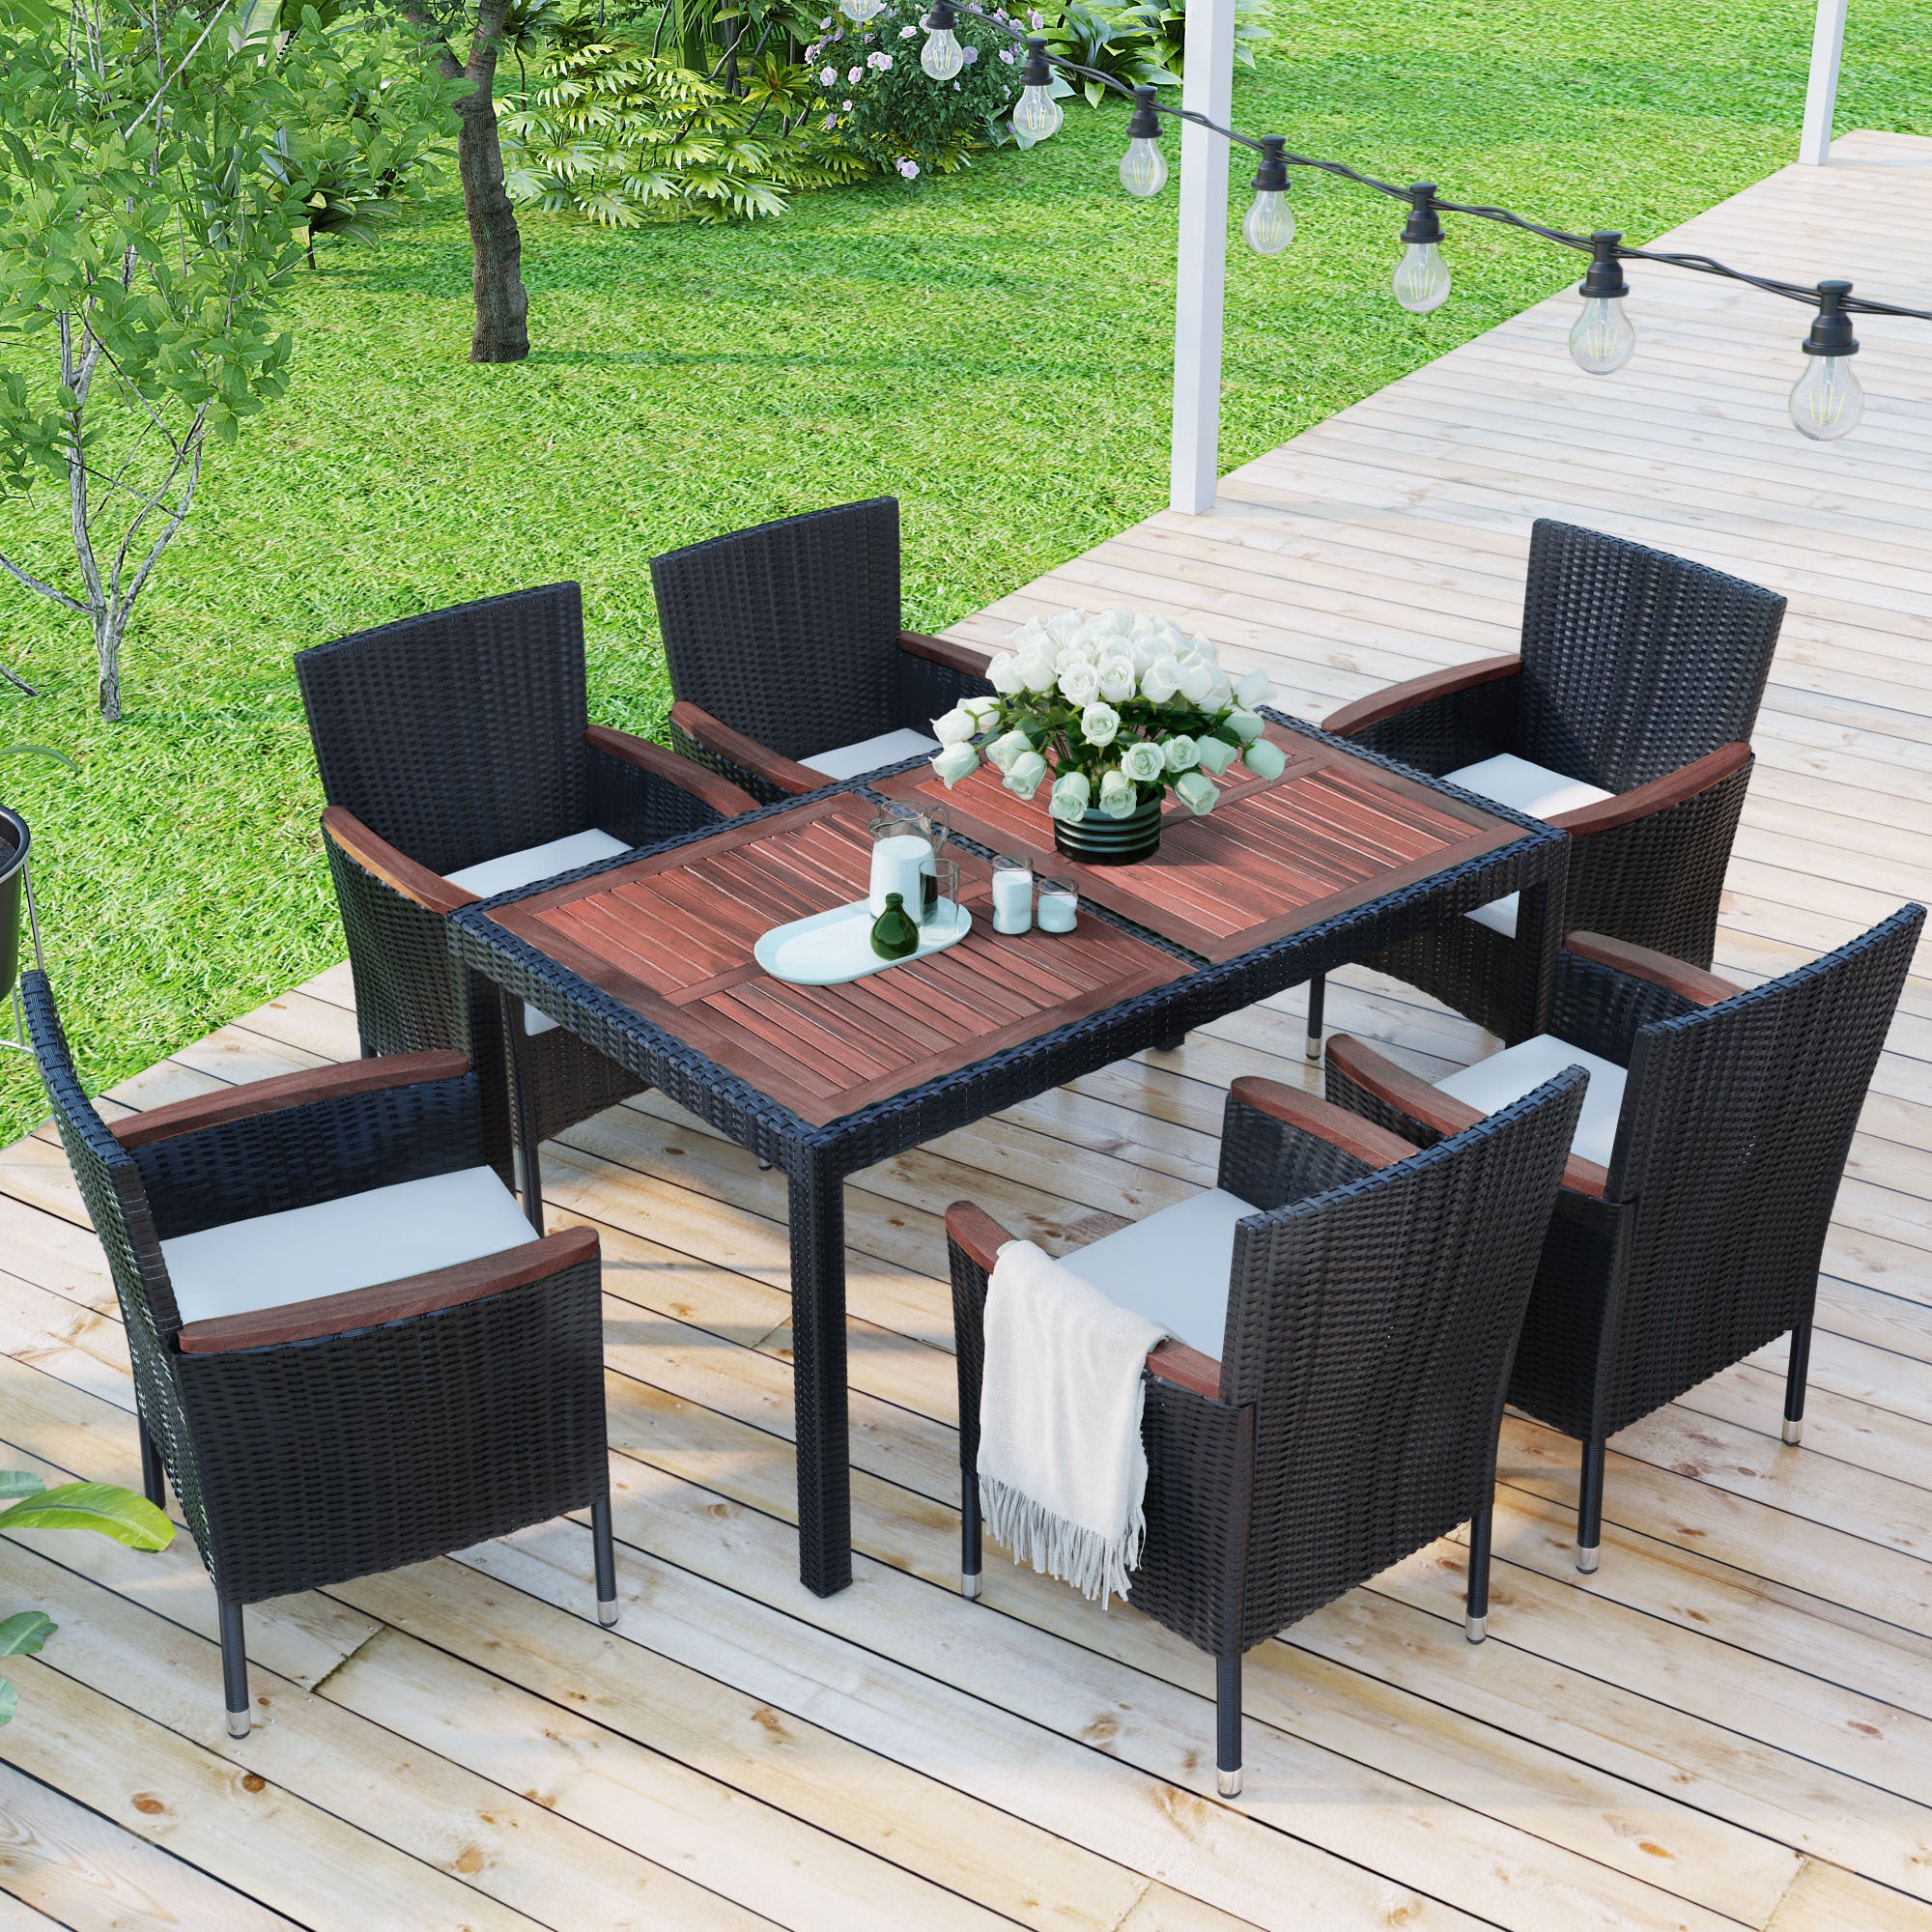 7-Piece Patio Dining Set, Garden Wicker Dining Table and Chairs Set, Acacia Wood Tabletop, Stackable Armrest Chairs with Cushions, Reddish-brown